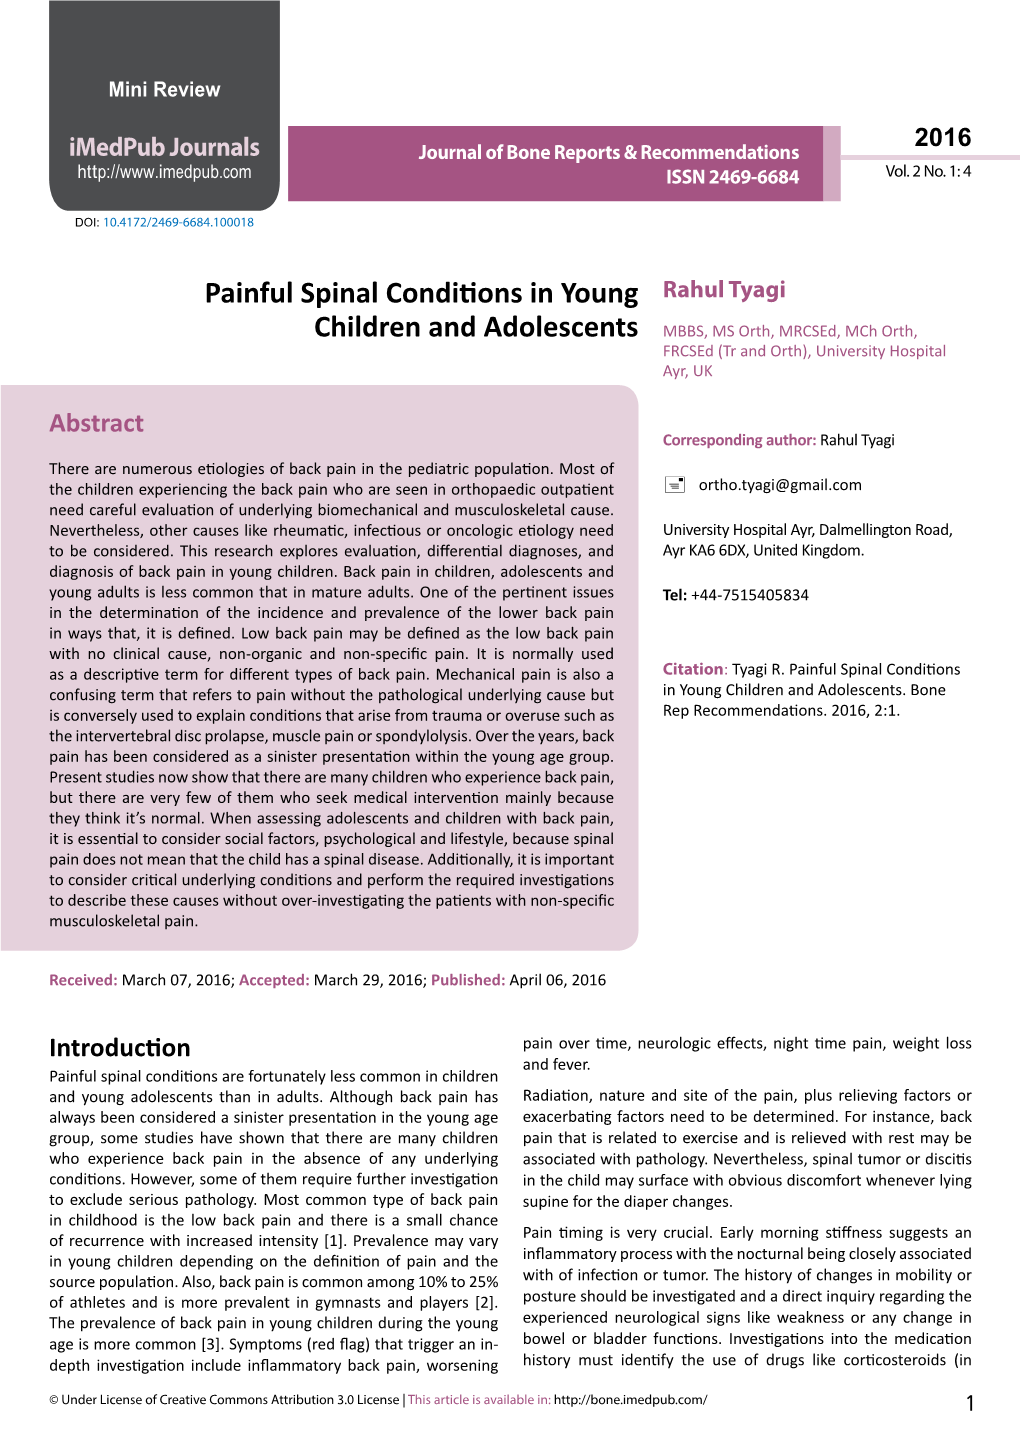 Painful Spinal Conditions in Young Children and Adolescents